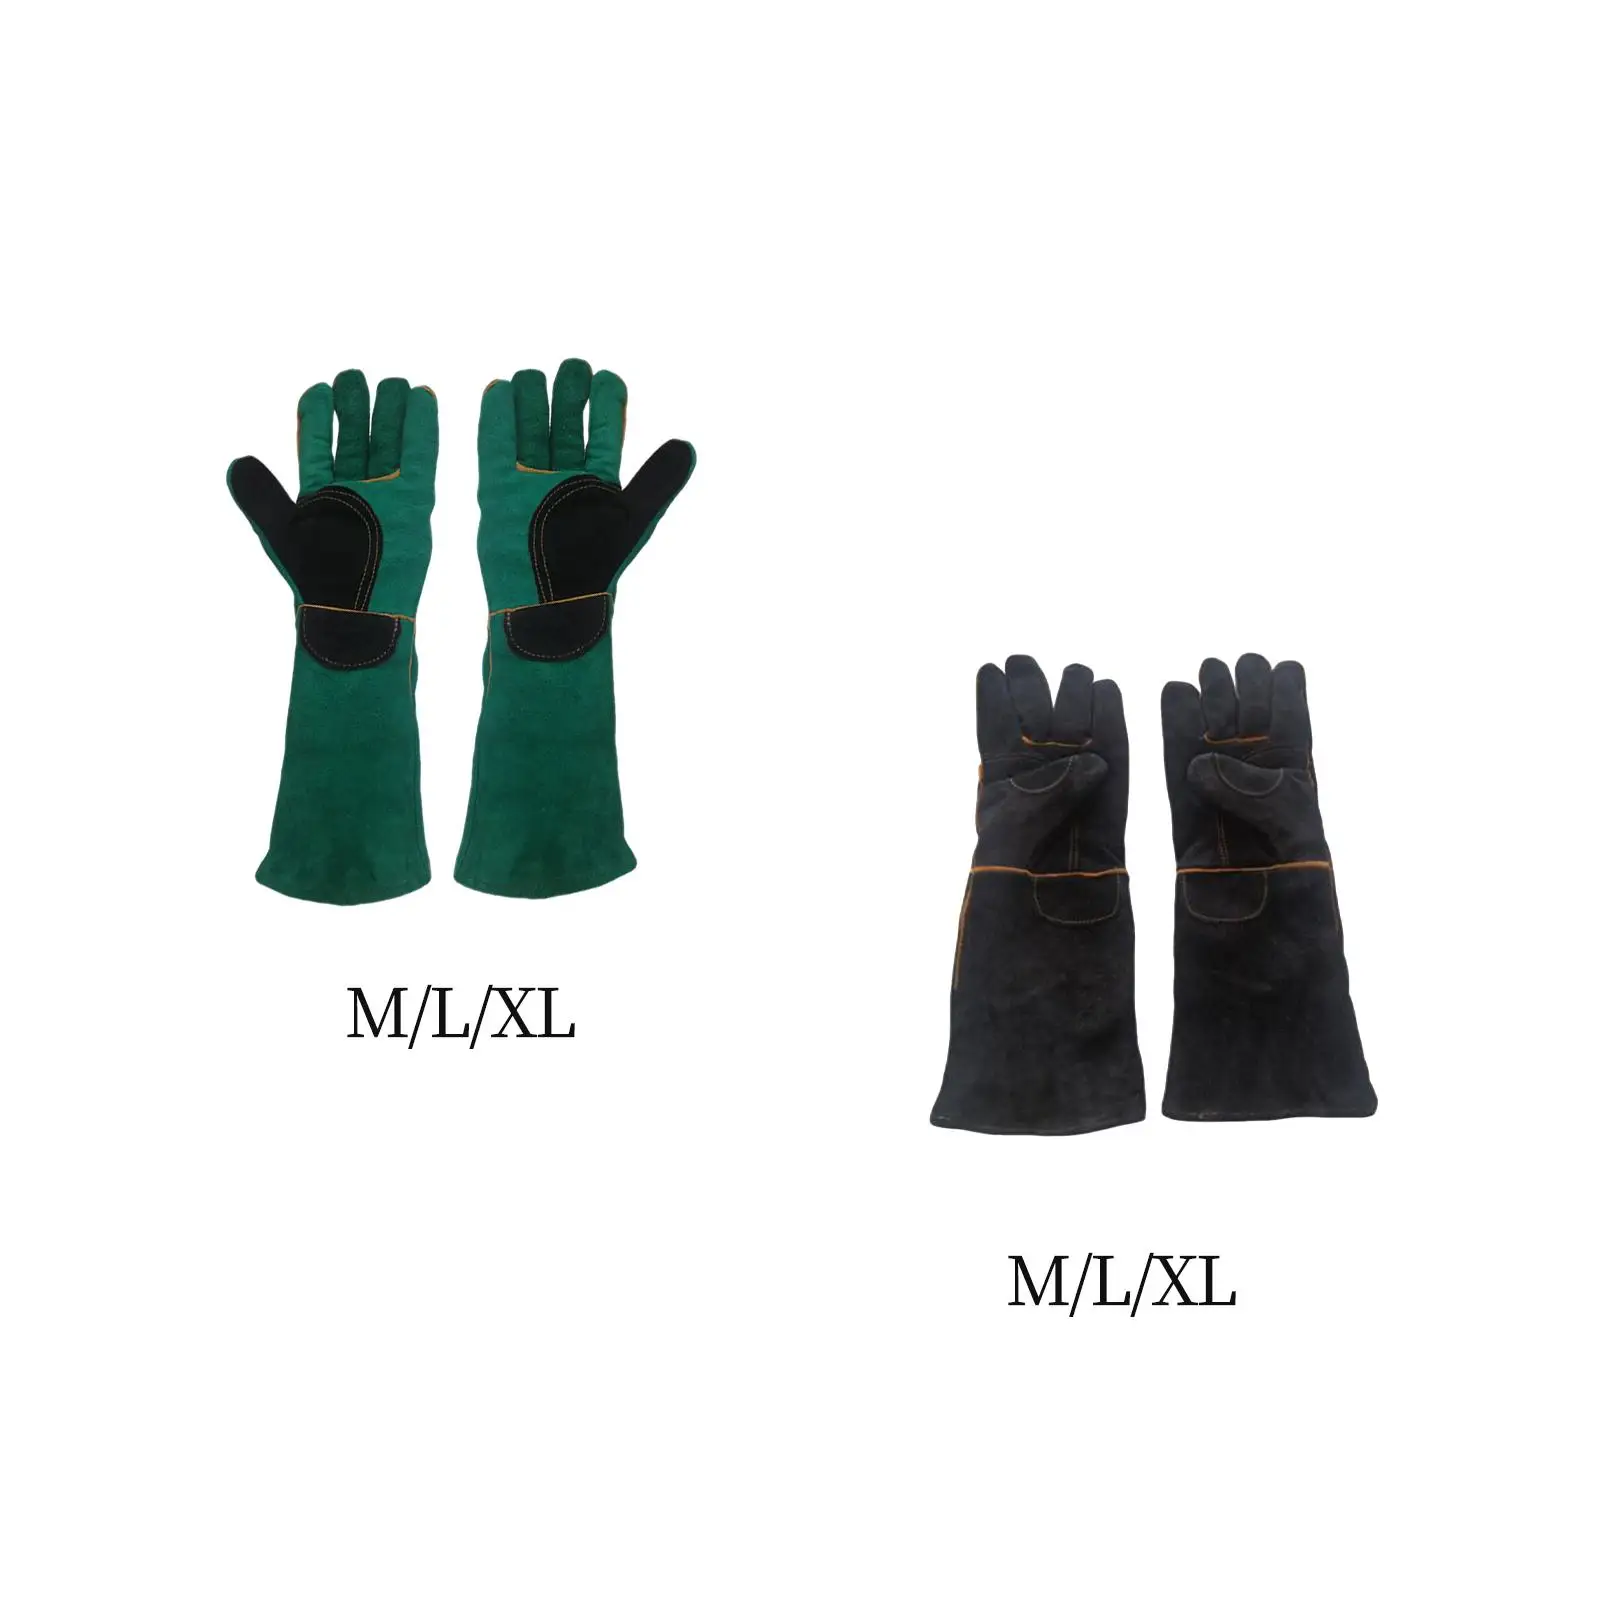 43cm Animal Handling Gloves Pet Reinforced Leather Training Anti Scratch Bite Resistant Protective for Zoo Worker Cat Dogs